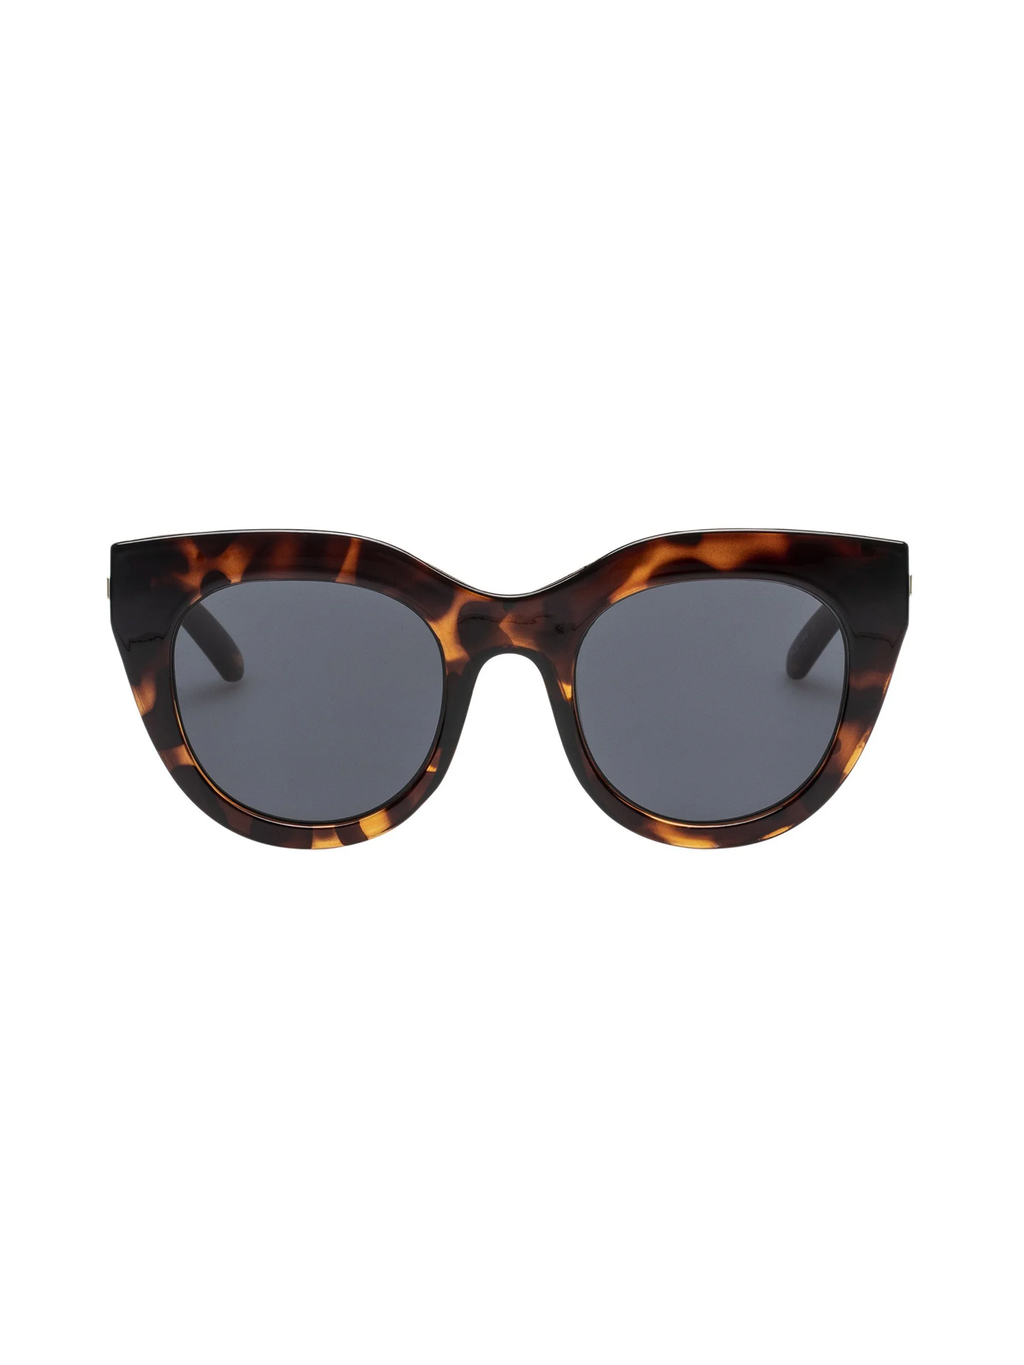 Air Heart Sunnies in Tort - Stitch And Feather